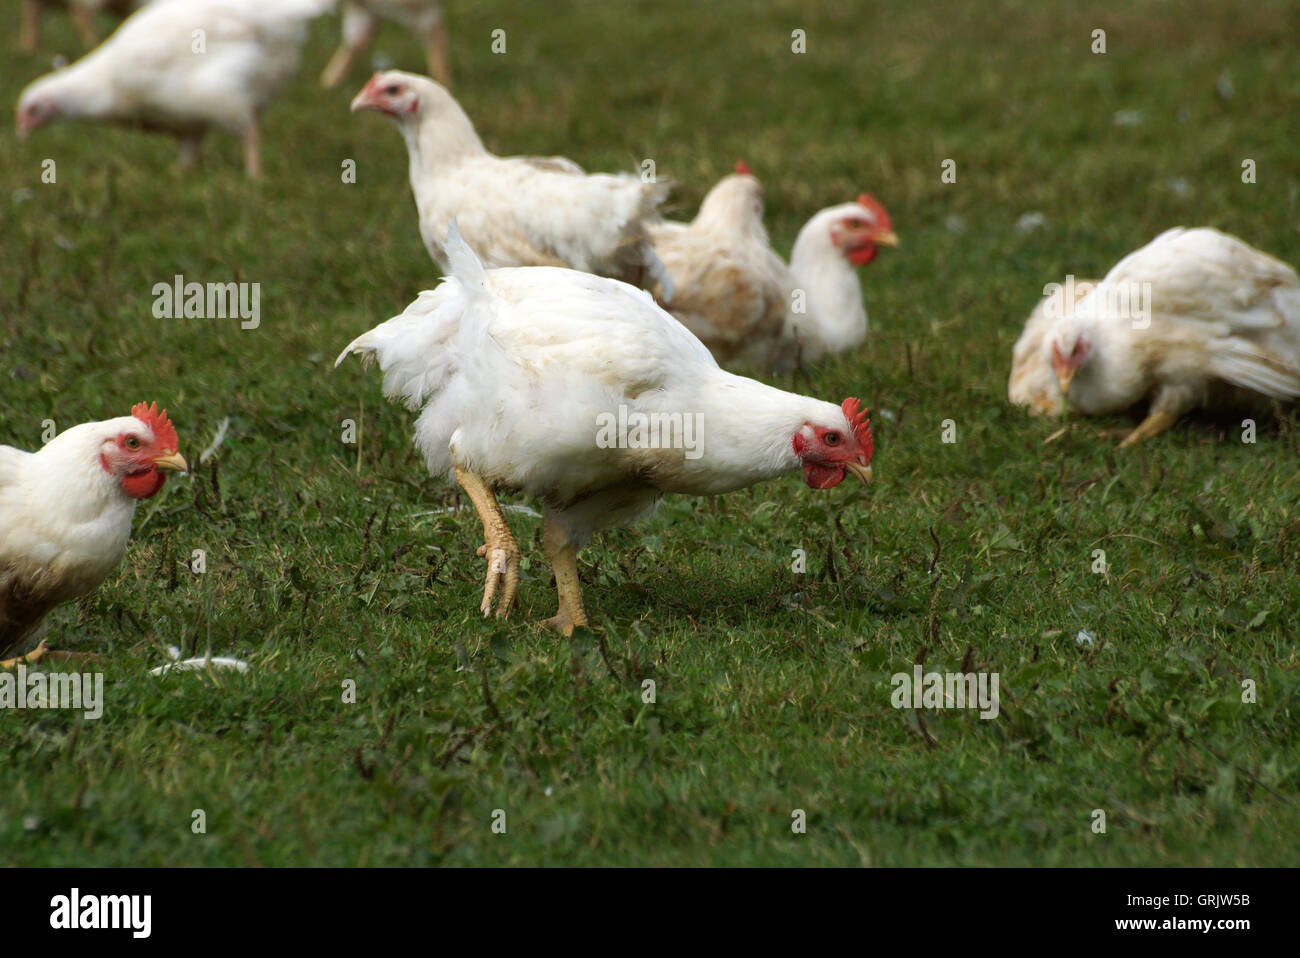 Organic free range chickens living naturally outside in a field Stock Photo